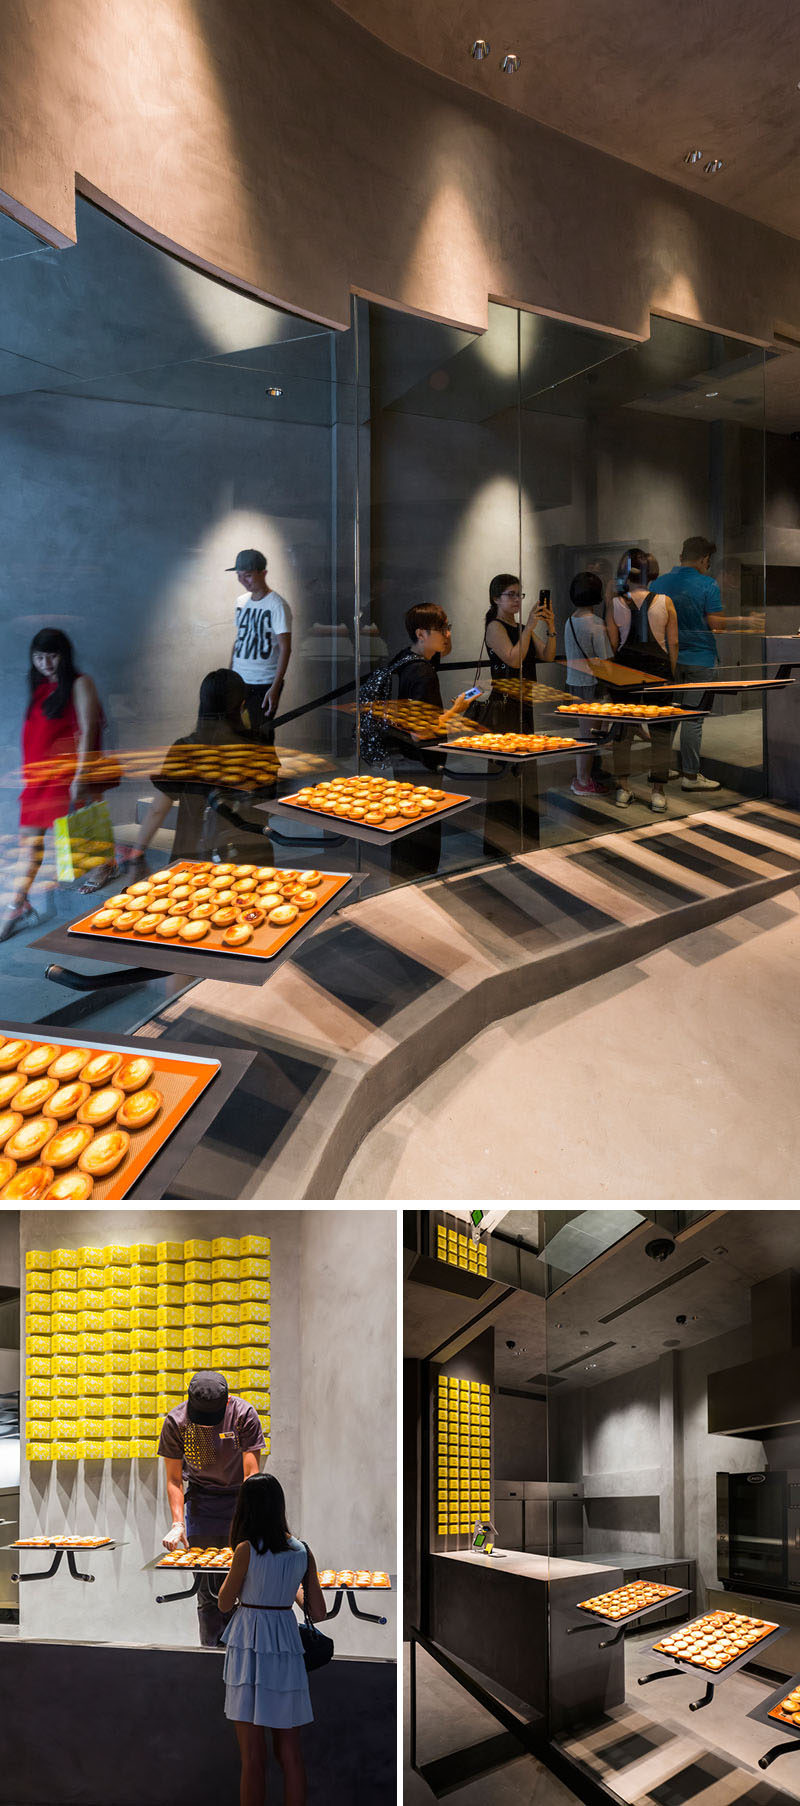 In this modern bakery, large glass windows that line the stairs allow the cheese tarts to be visible to people that are lining up to buy them. #Bakery #ModernStore #RetailDesign